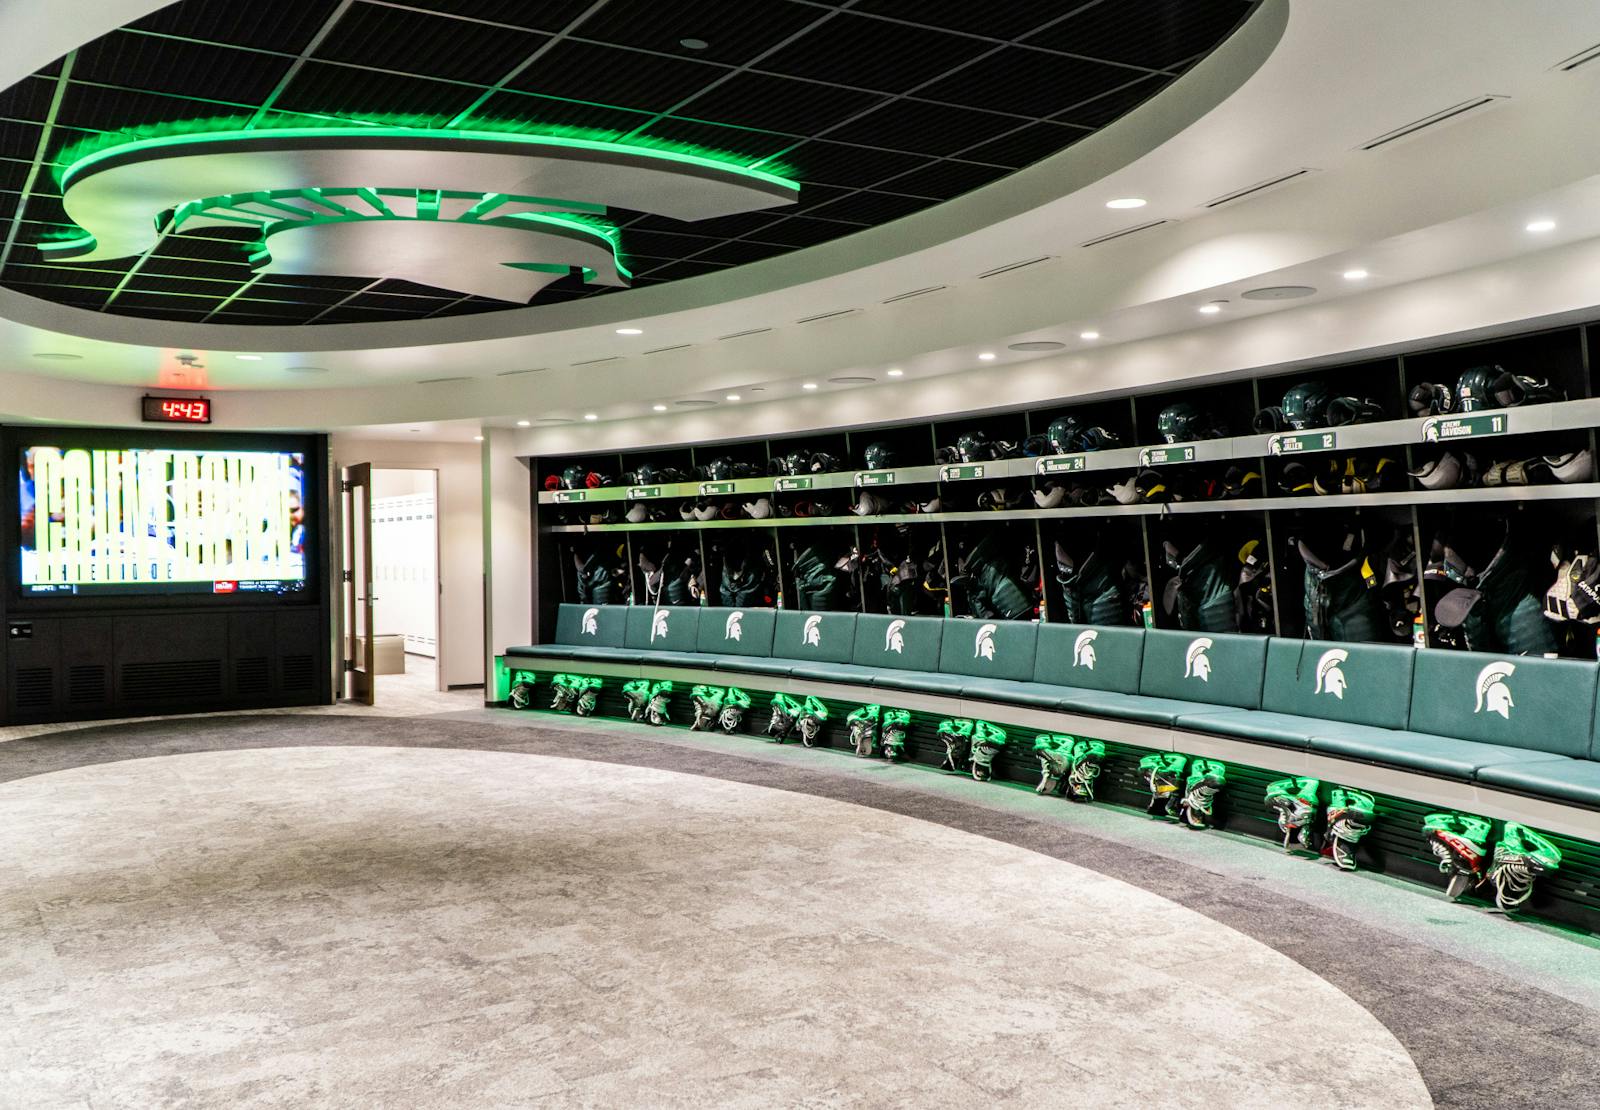 NHL - Big question - Which arena has the best dressing room for